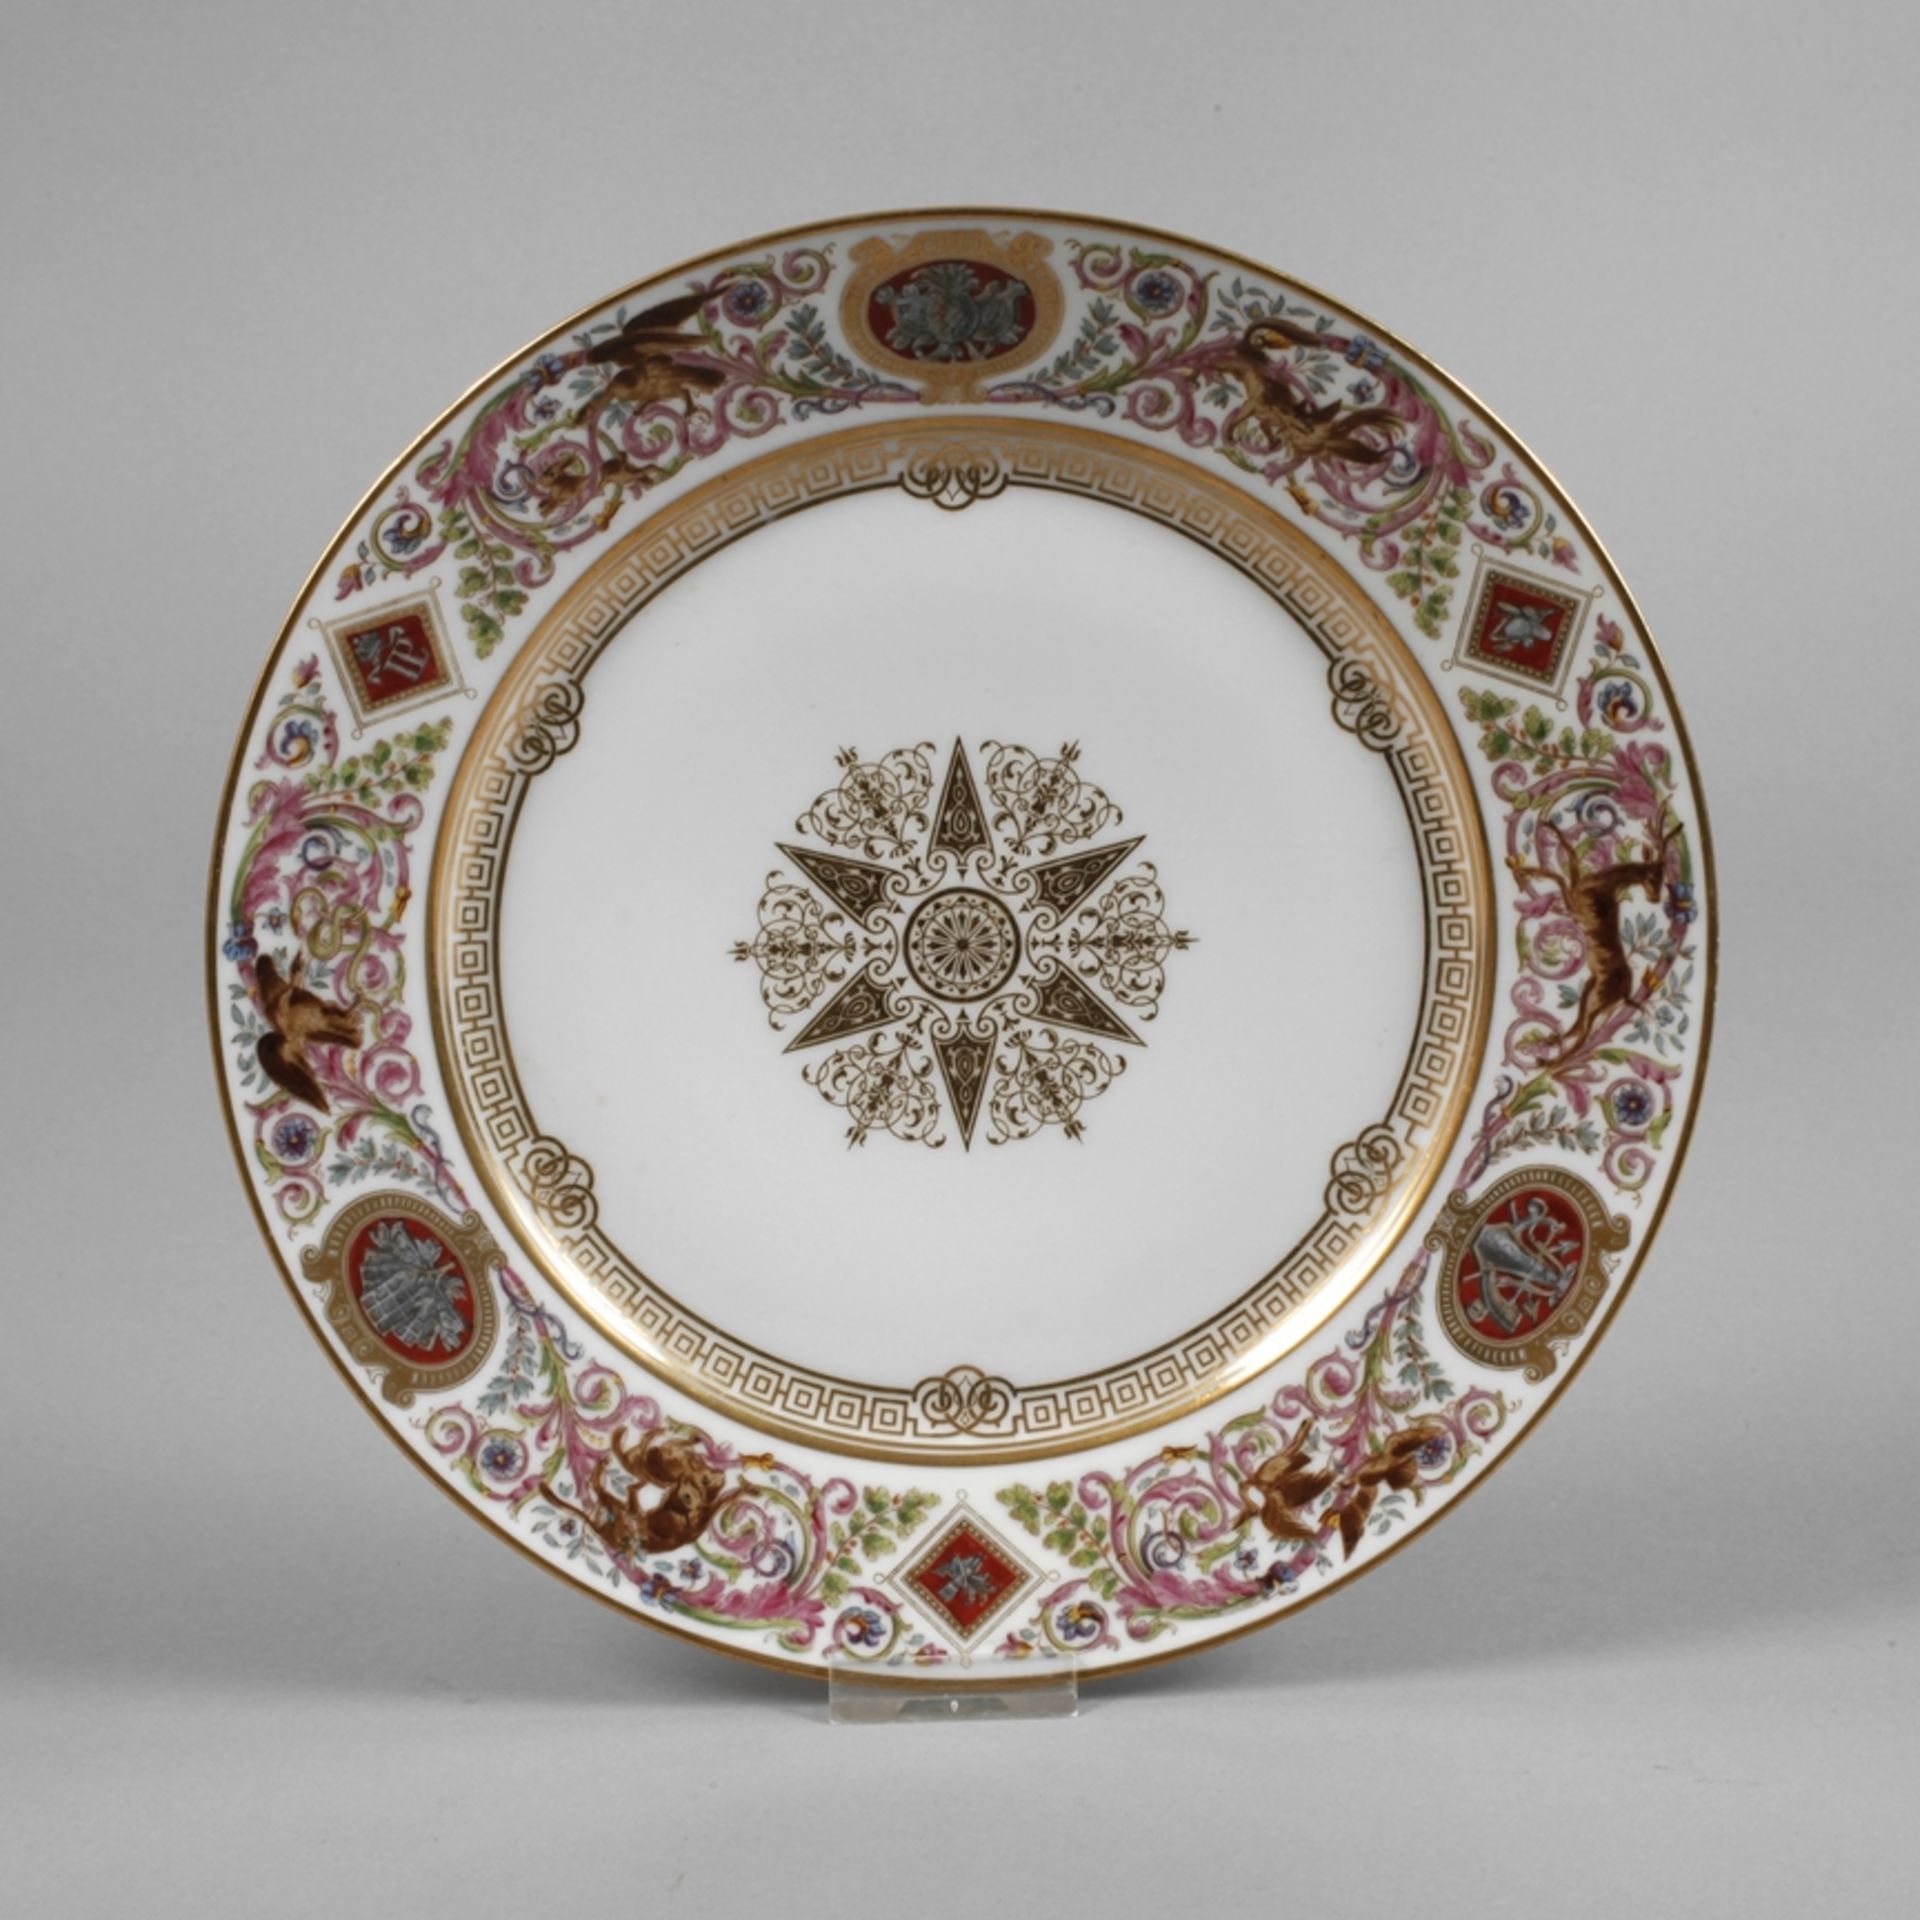 Sèvres ceremonial plate from the château of Fontainebleau